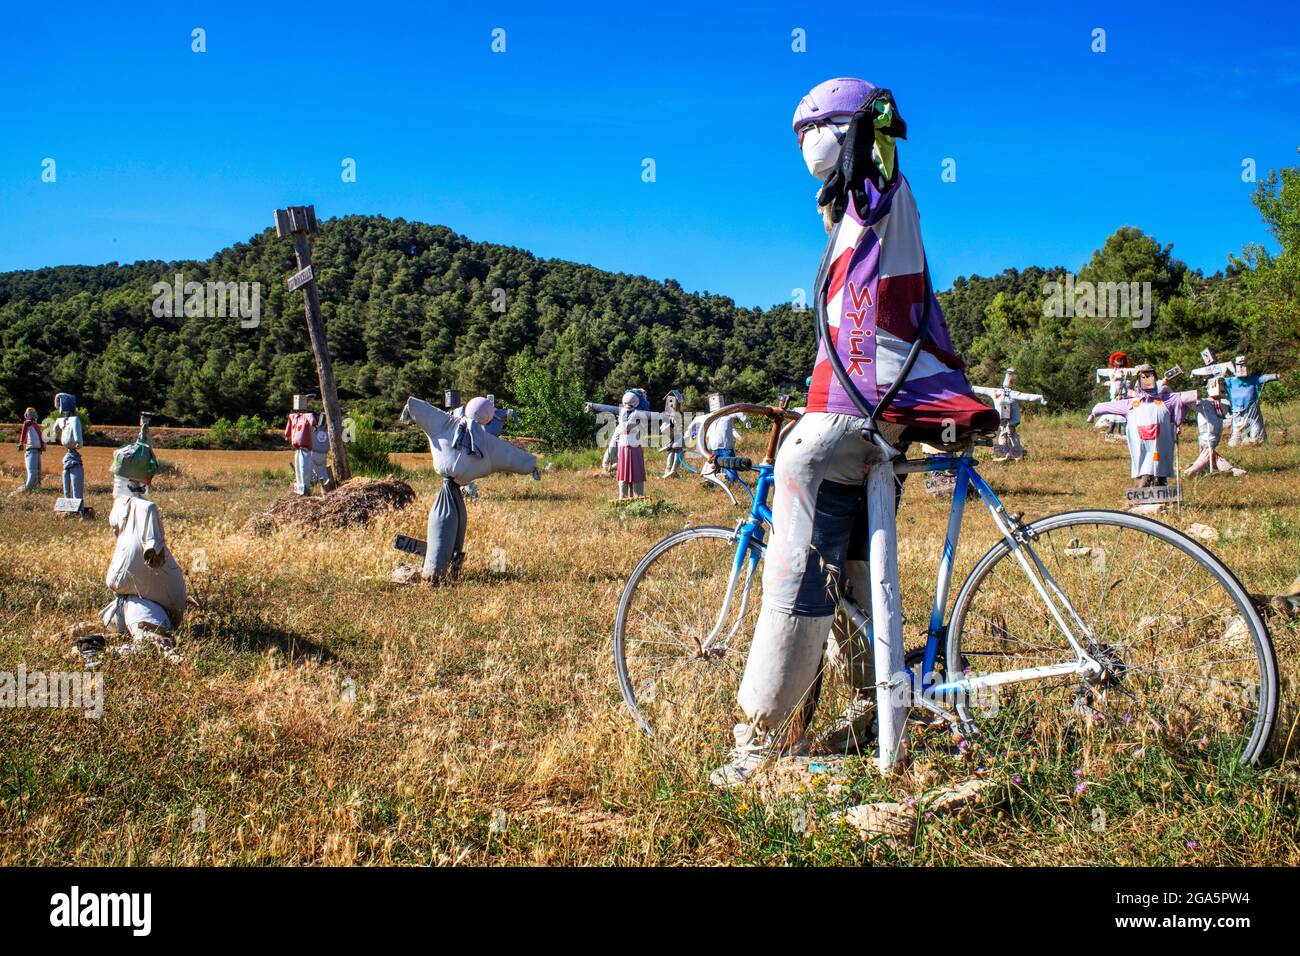 Estimaocells, scarecrows who love birds. Vallbona de les Monges LLeida Catalonia. Dressing scarecrows in recycled field clothes and simulated binocula Stock Photo